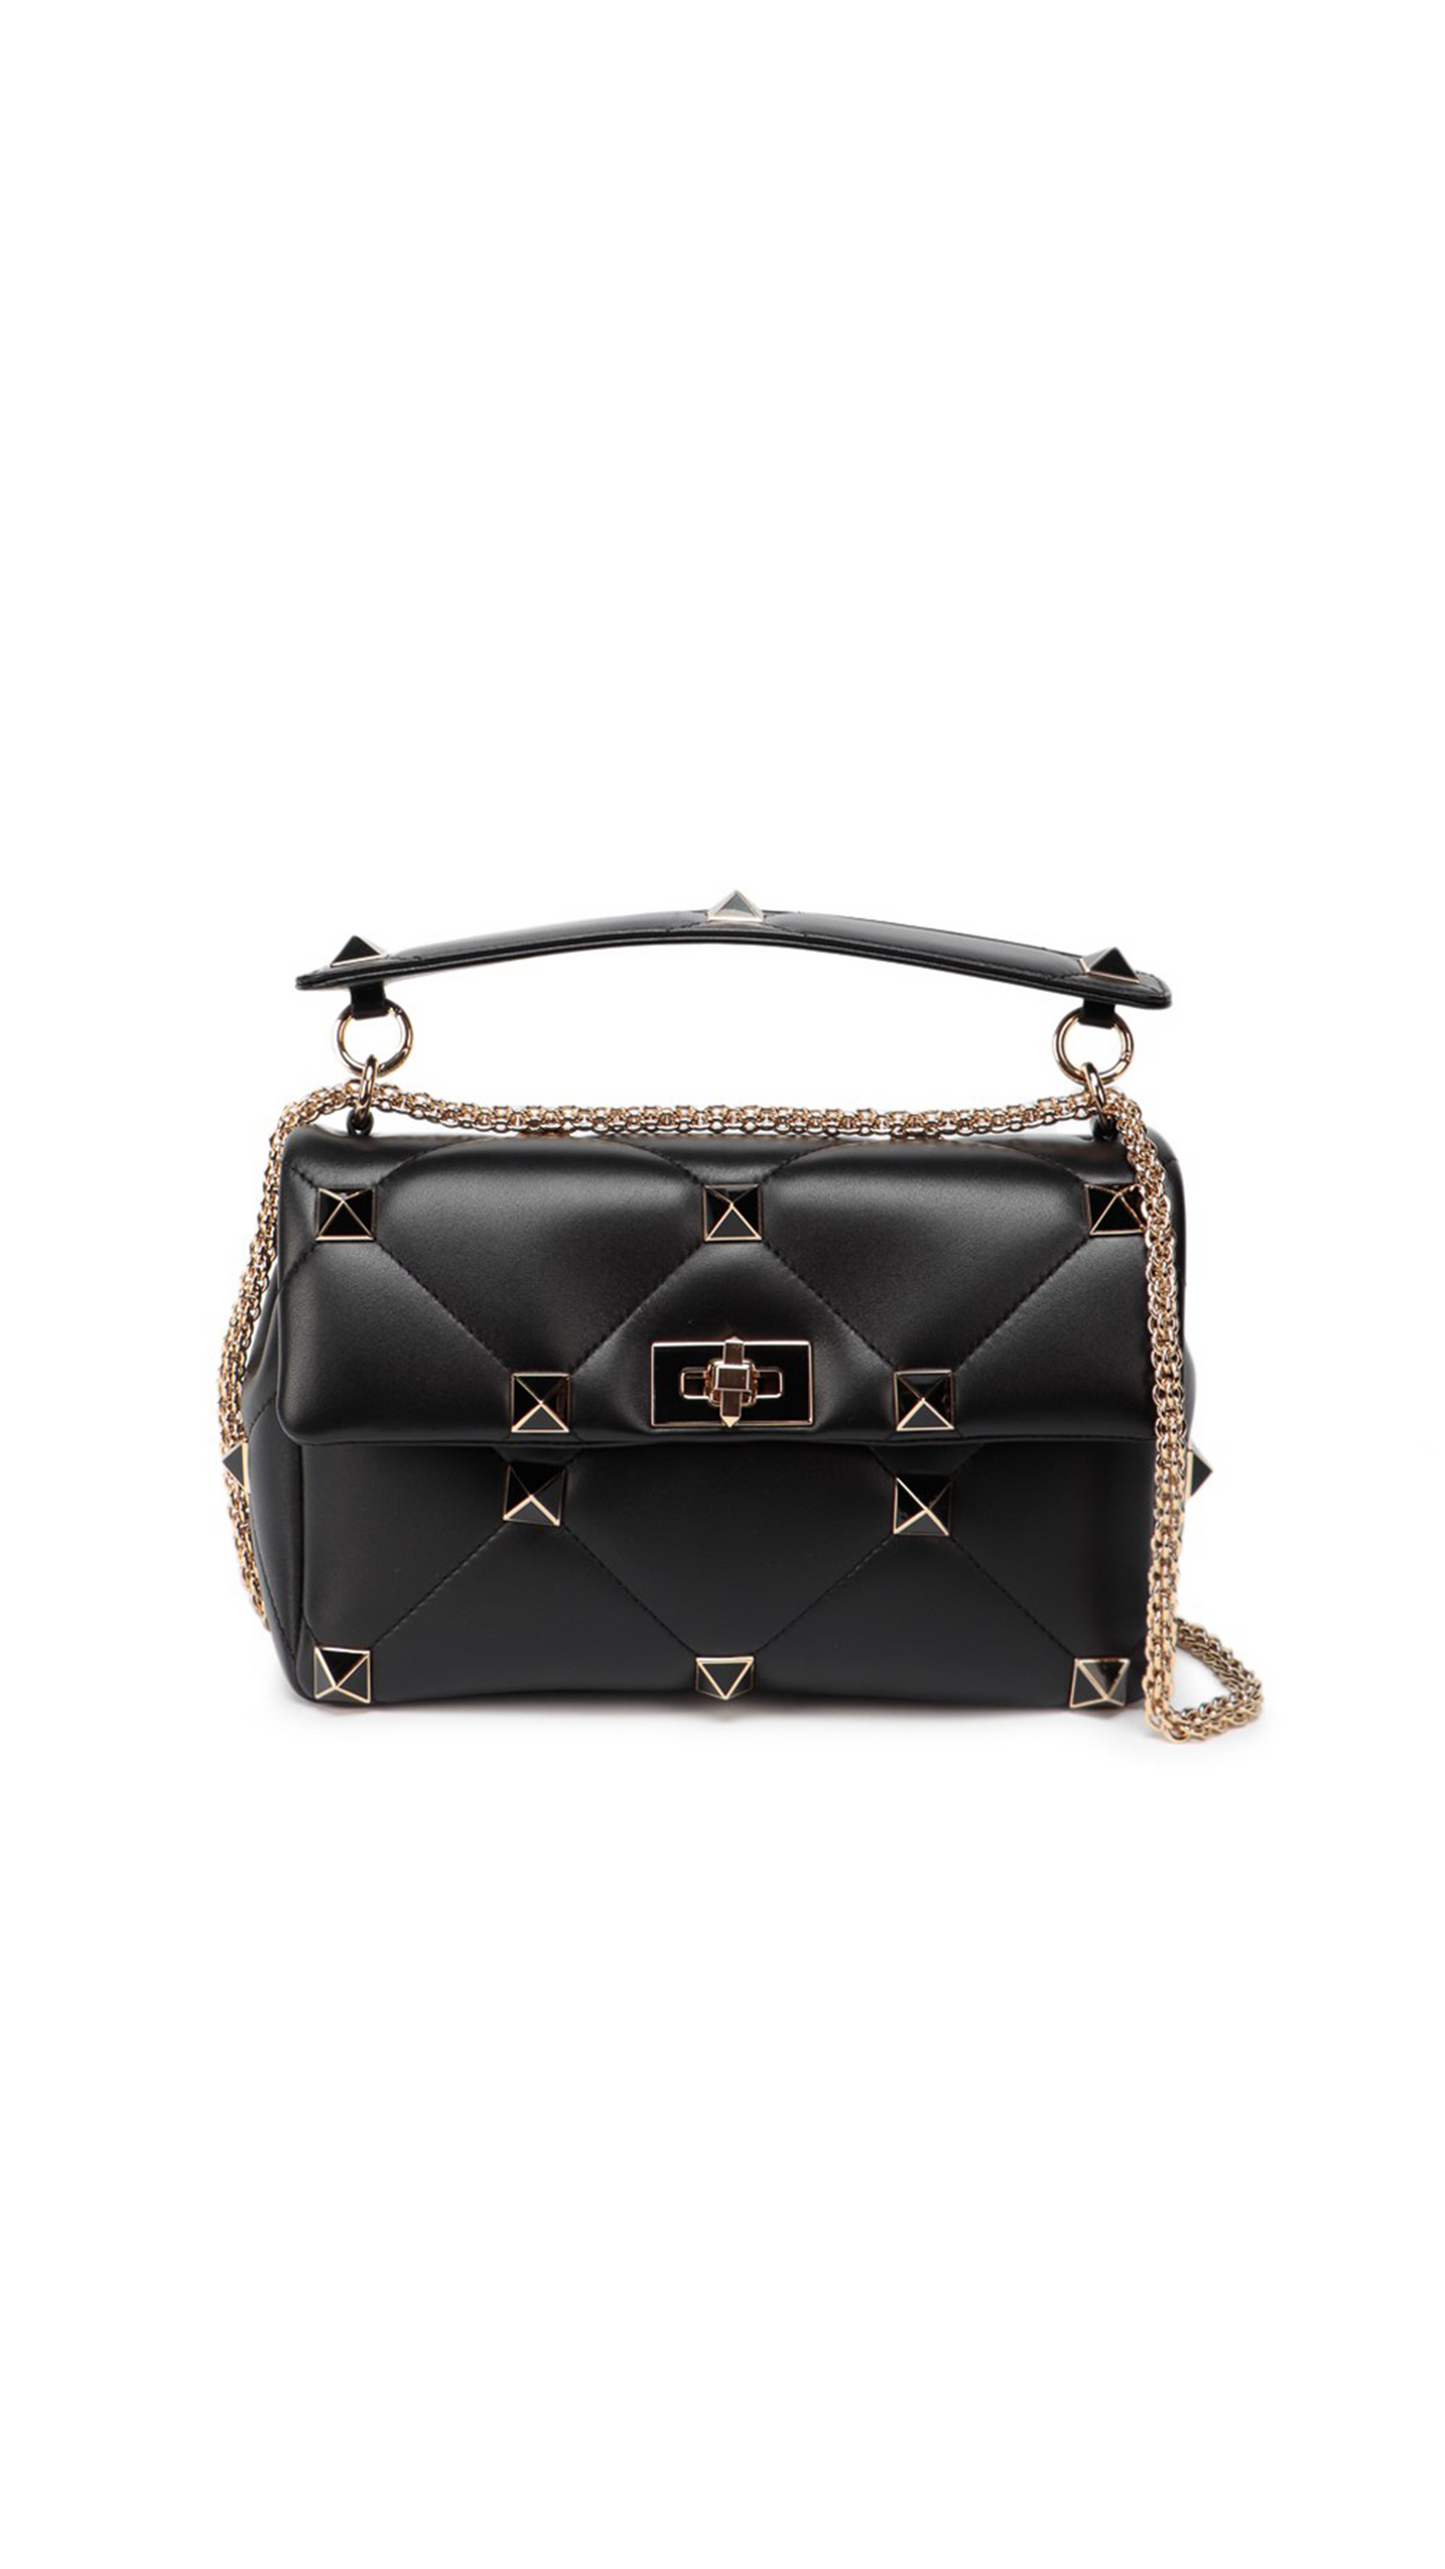 Large Roman Stud the Shoulder Bag in Nappa with Chain and Enameled Studs - Black